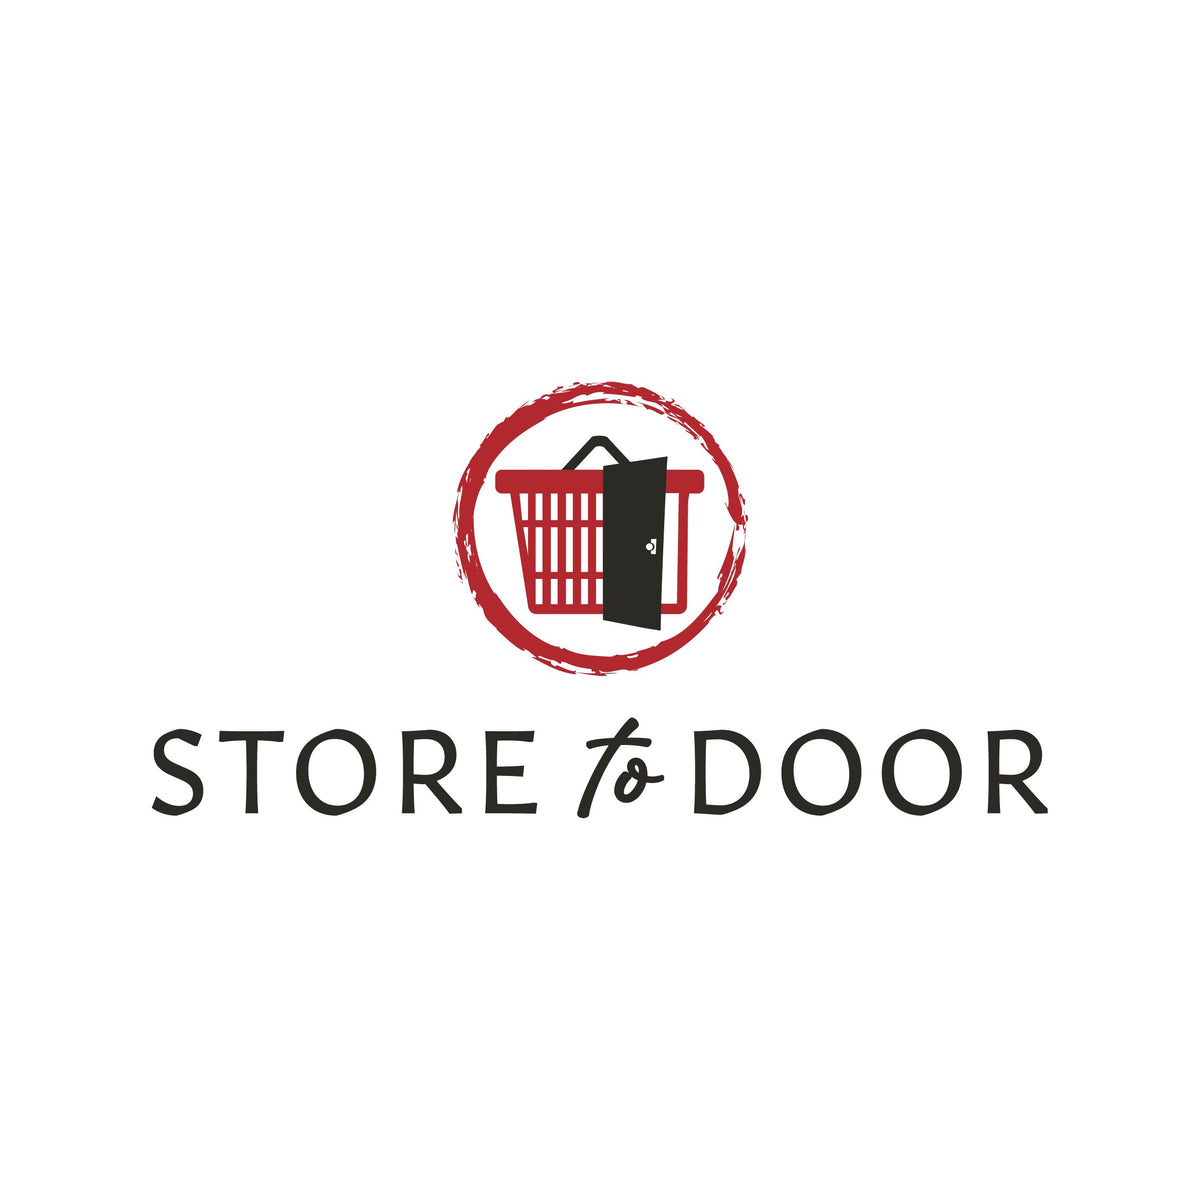 StoreToDoor Canada  Same-Day Delivery Service From Store To Door